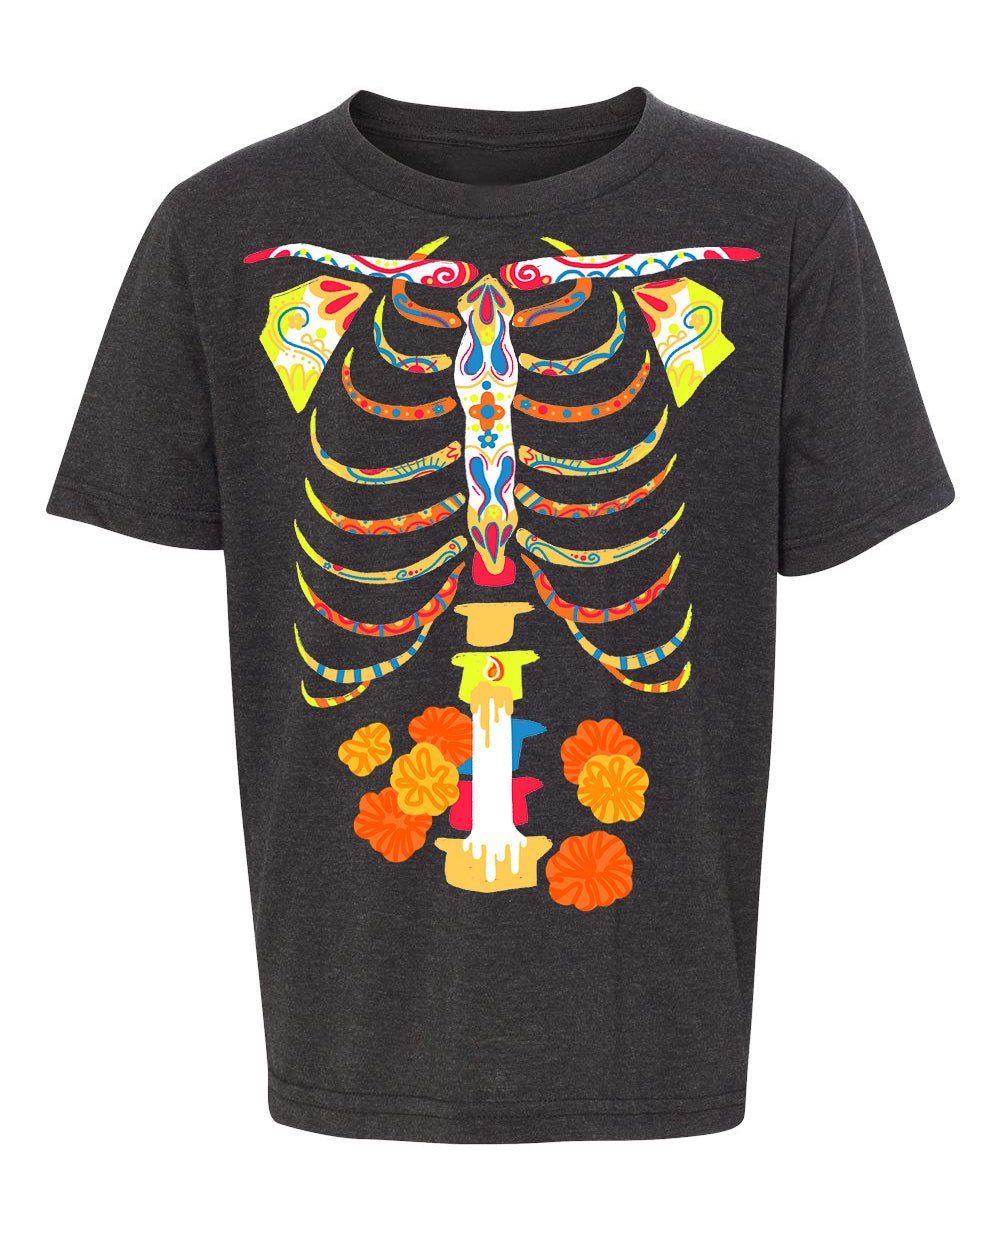 Day of the Dead Halloween Skeleton Kids T Shirts - Mato & Hash